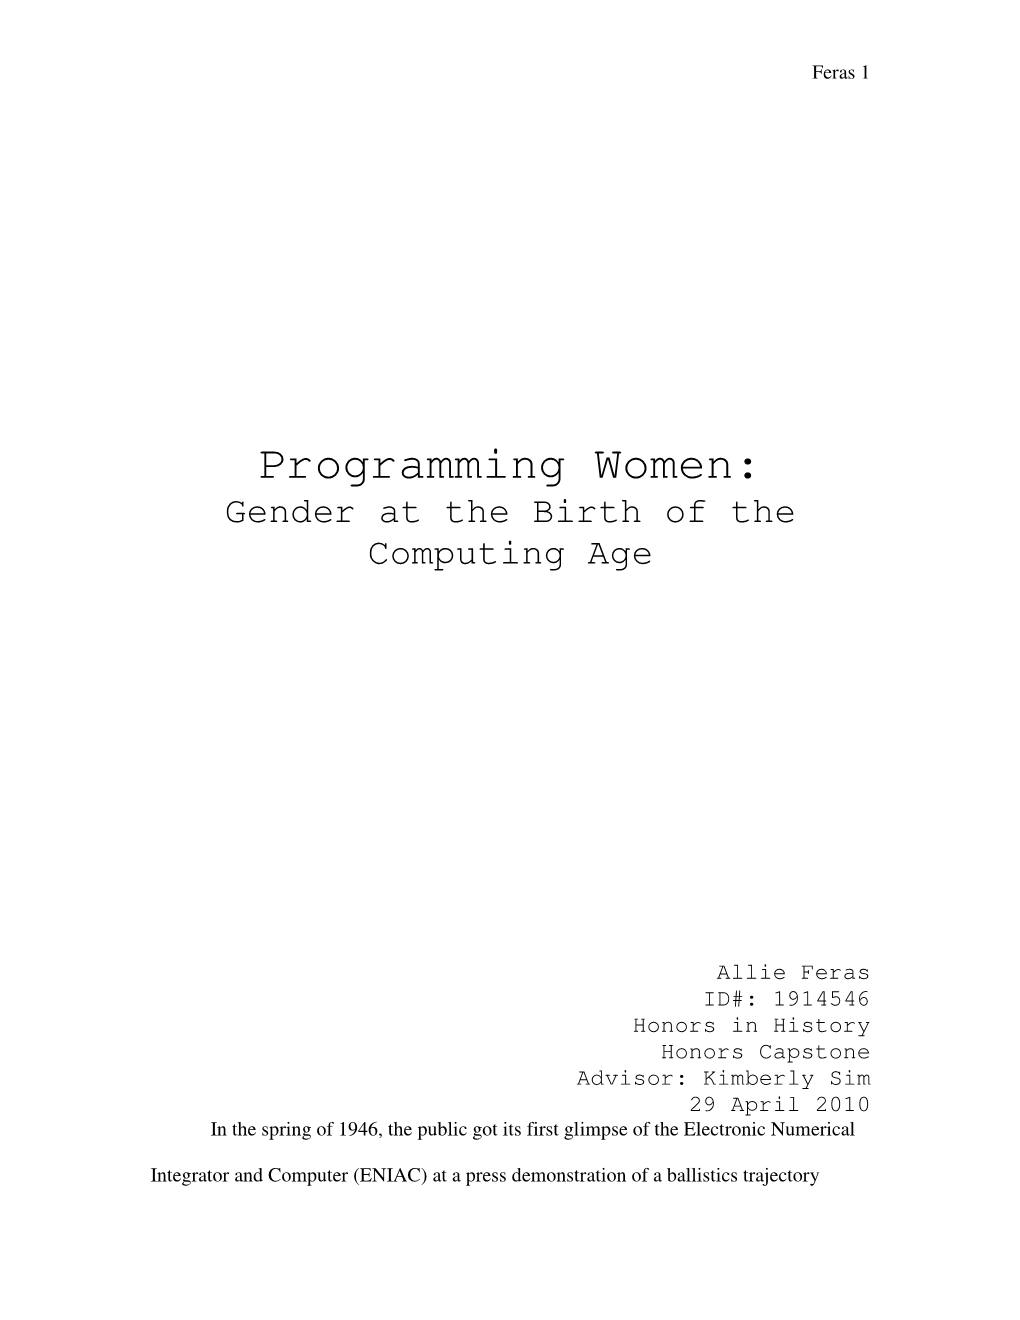 Programming Women: Gender at the Birth of the Computing Age